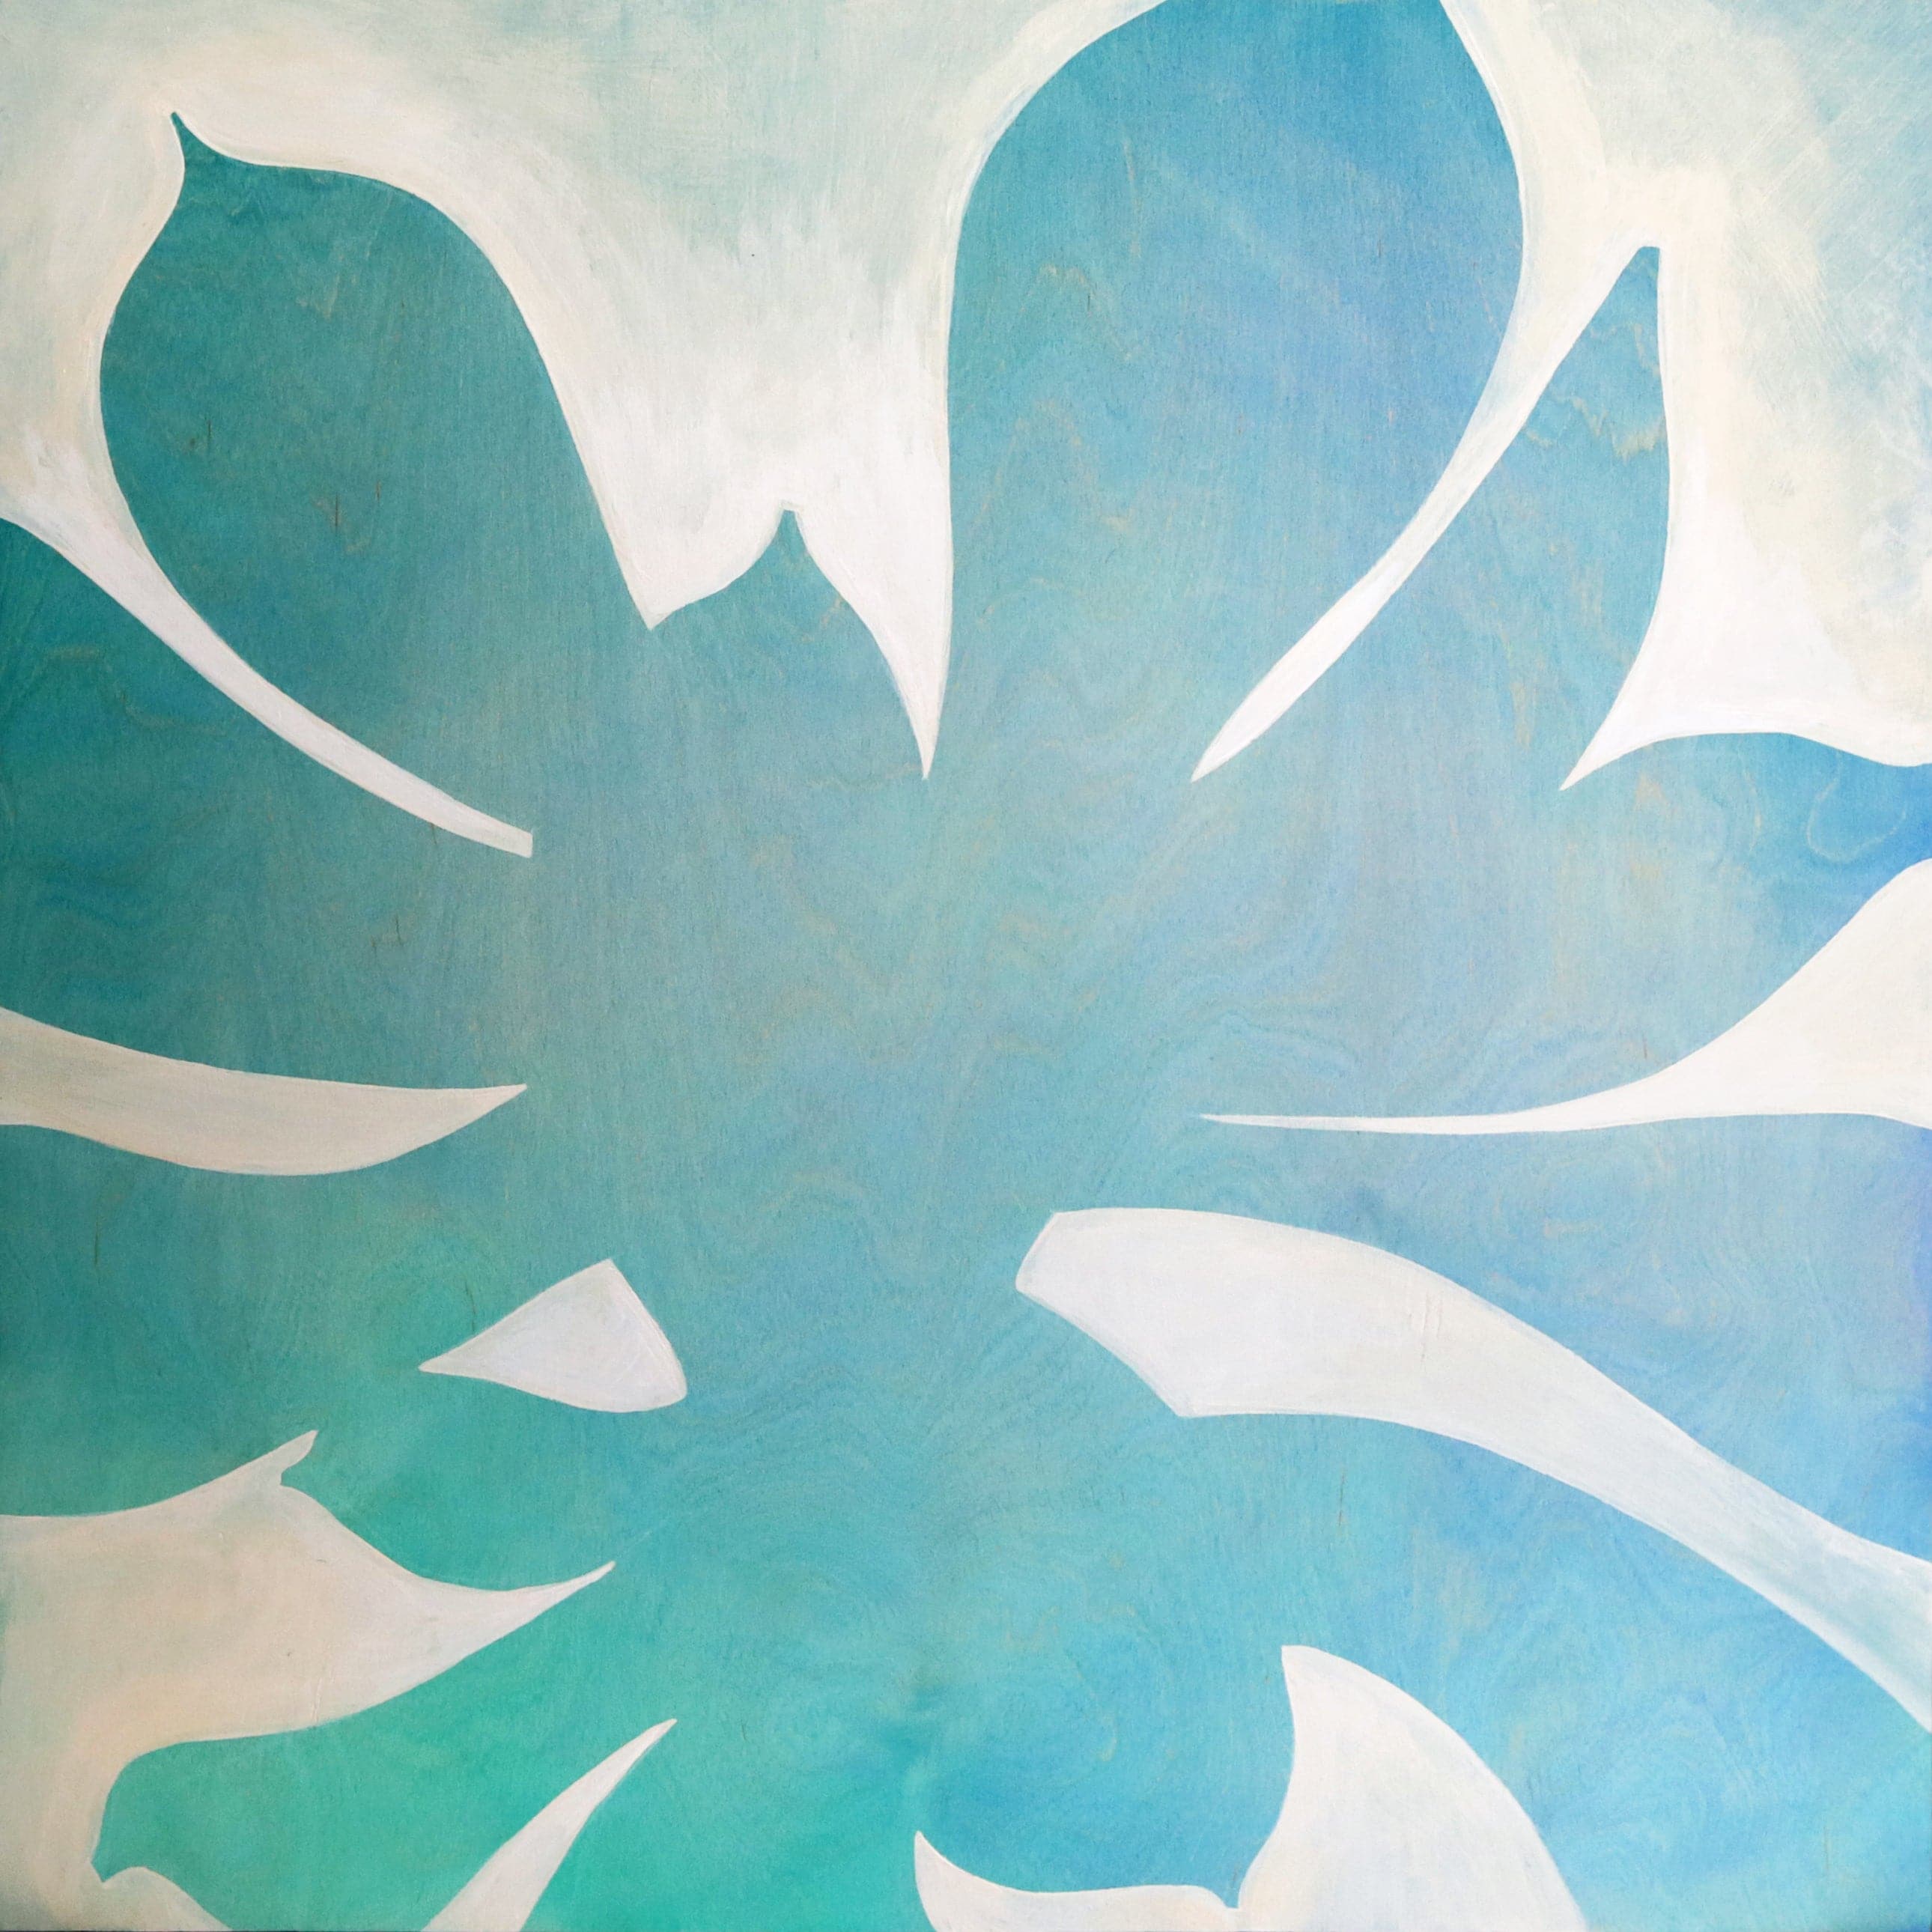 Original painting of a silhouetted blue echeveria succulent plant in aqua and light blue ombre colors and wood grain texture.